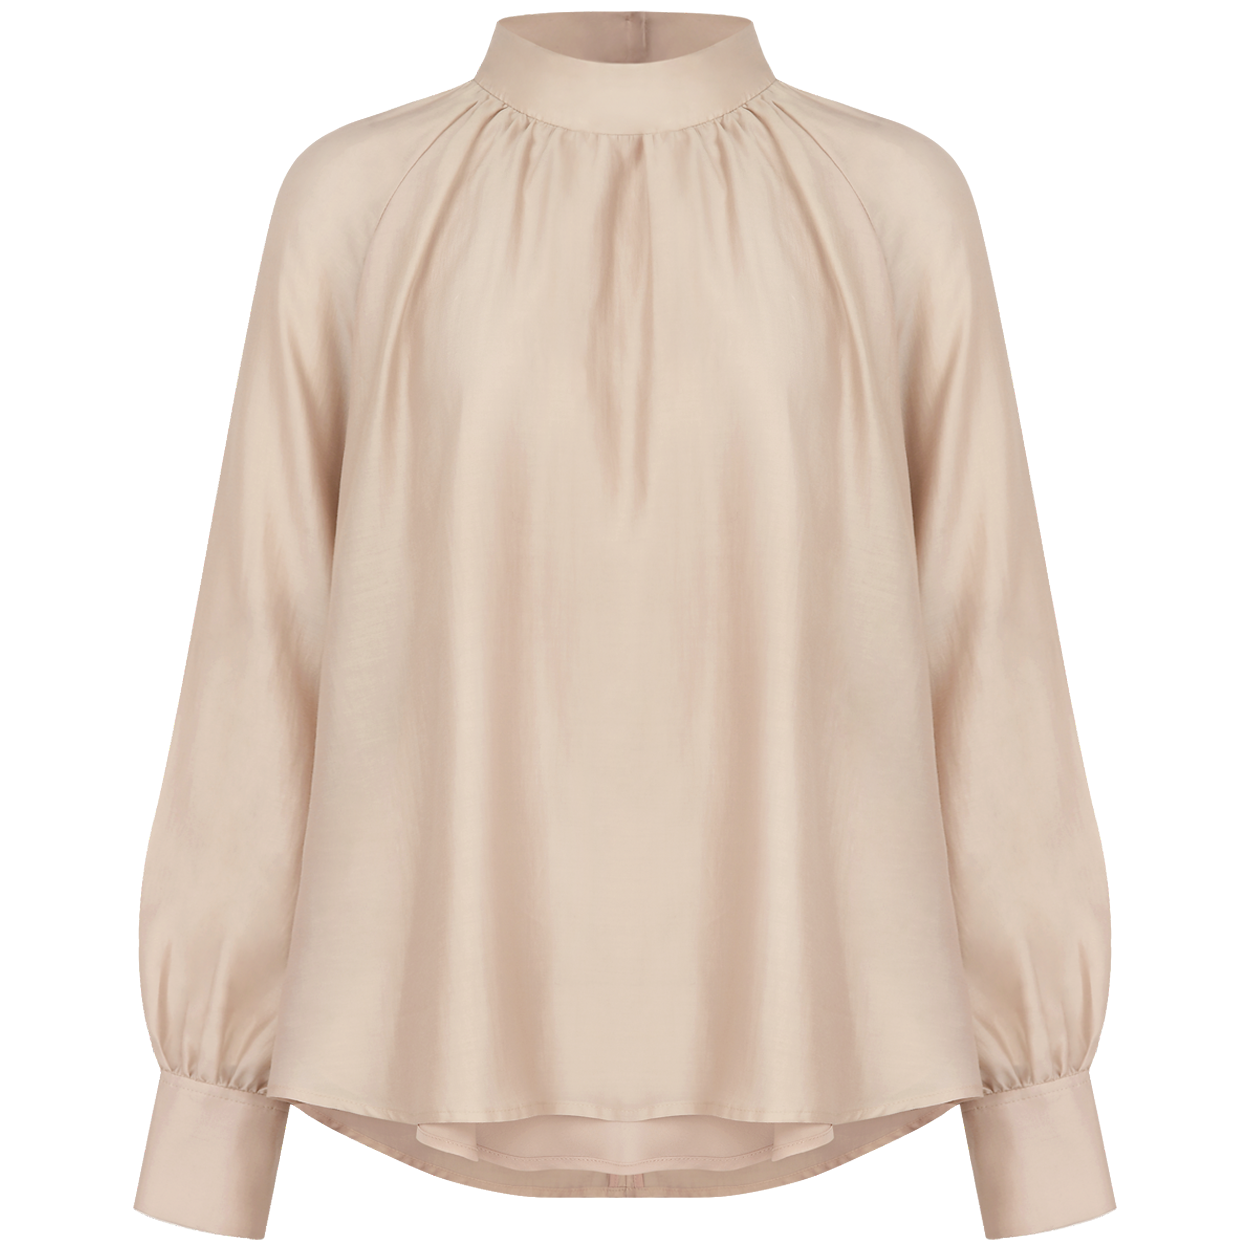 Dahlia blouse (champagne pink)